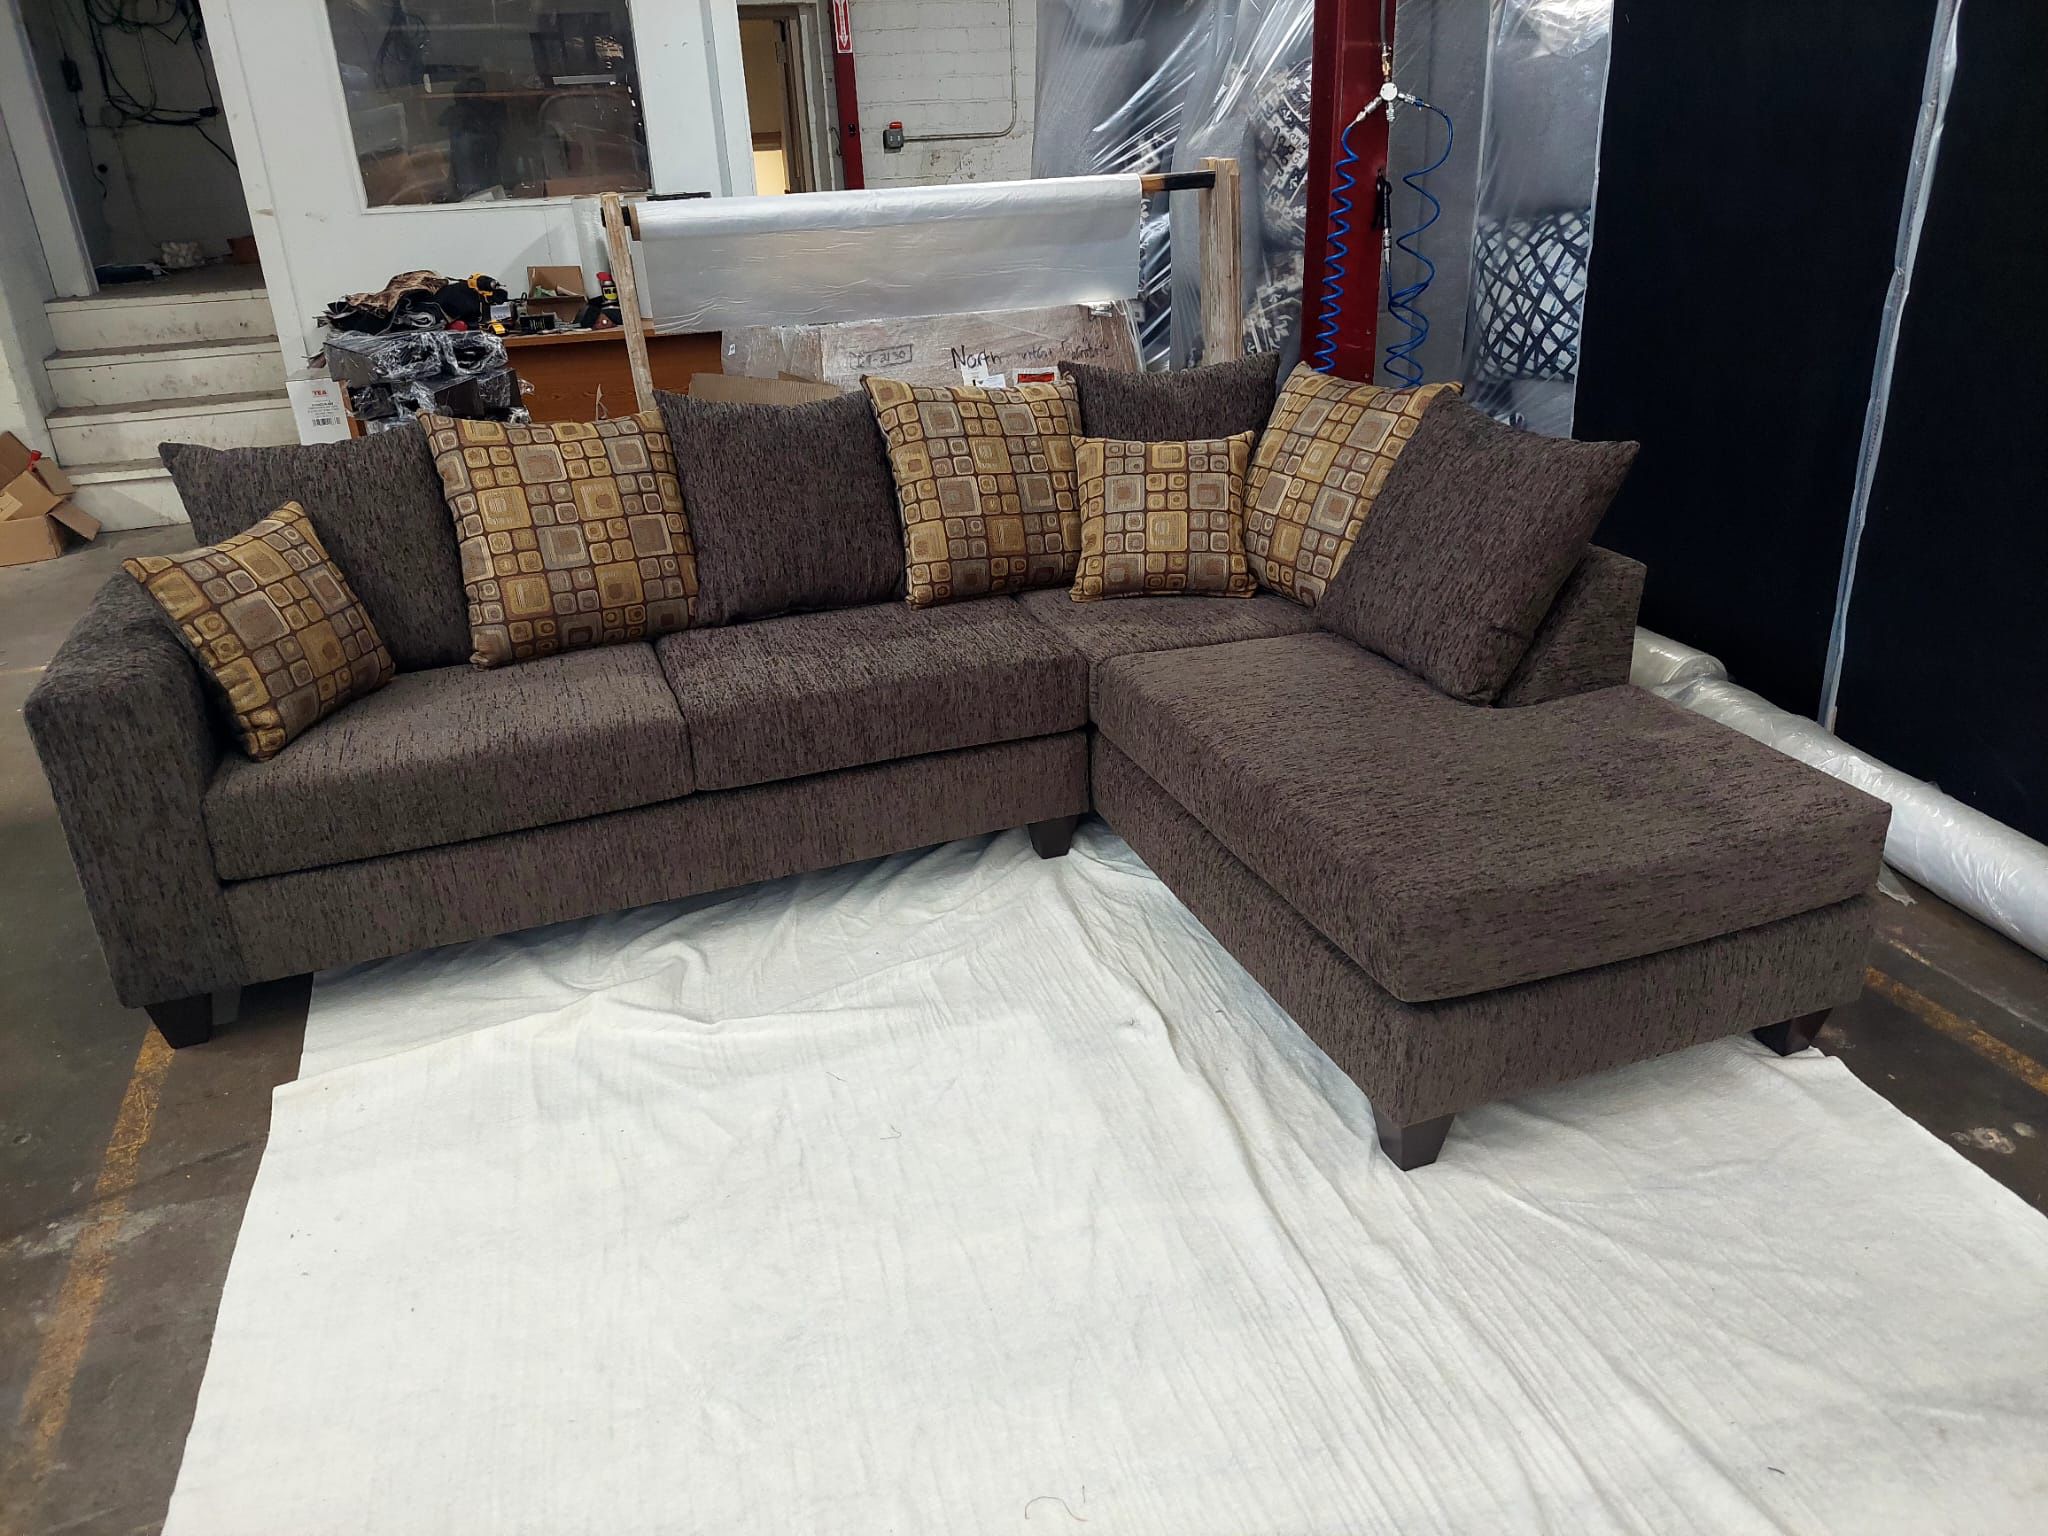 New Sectional For $650